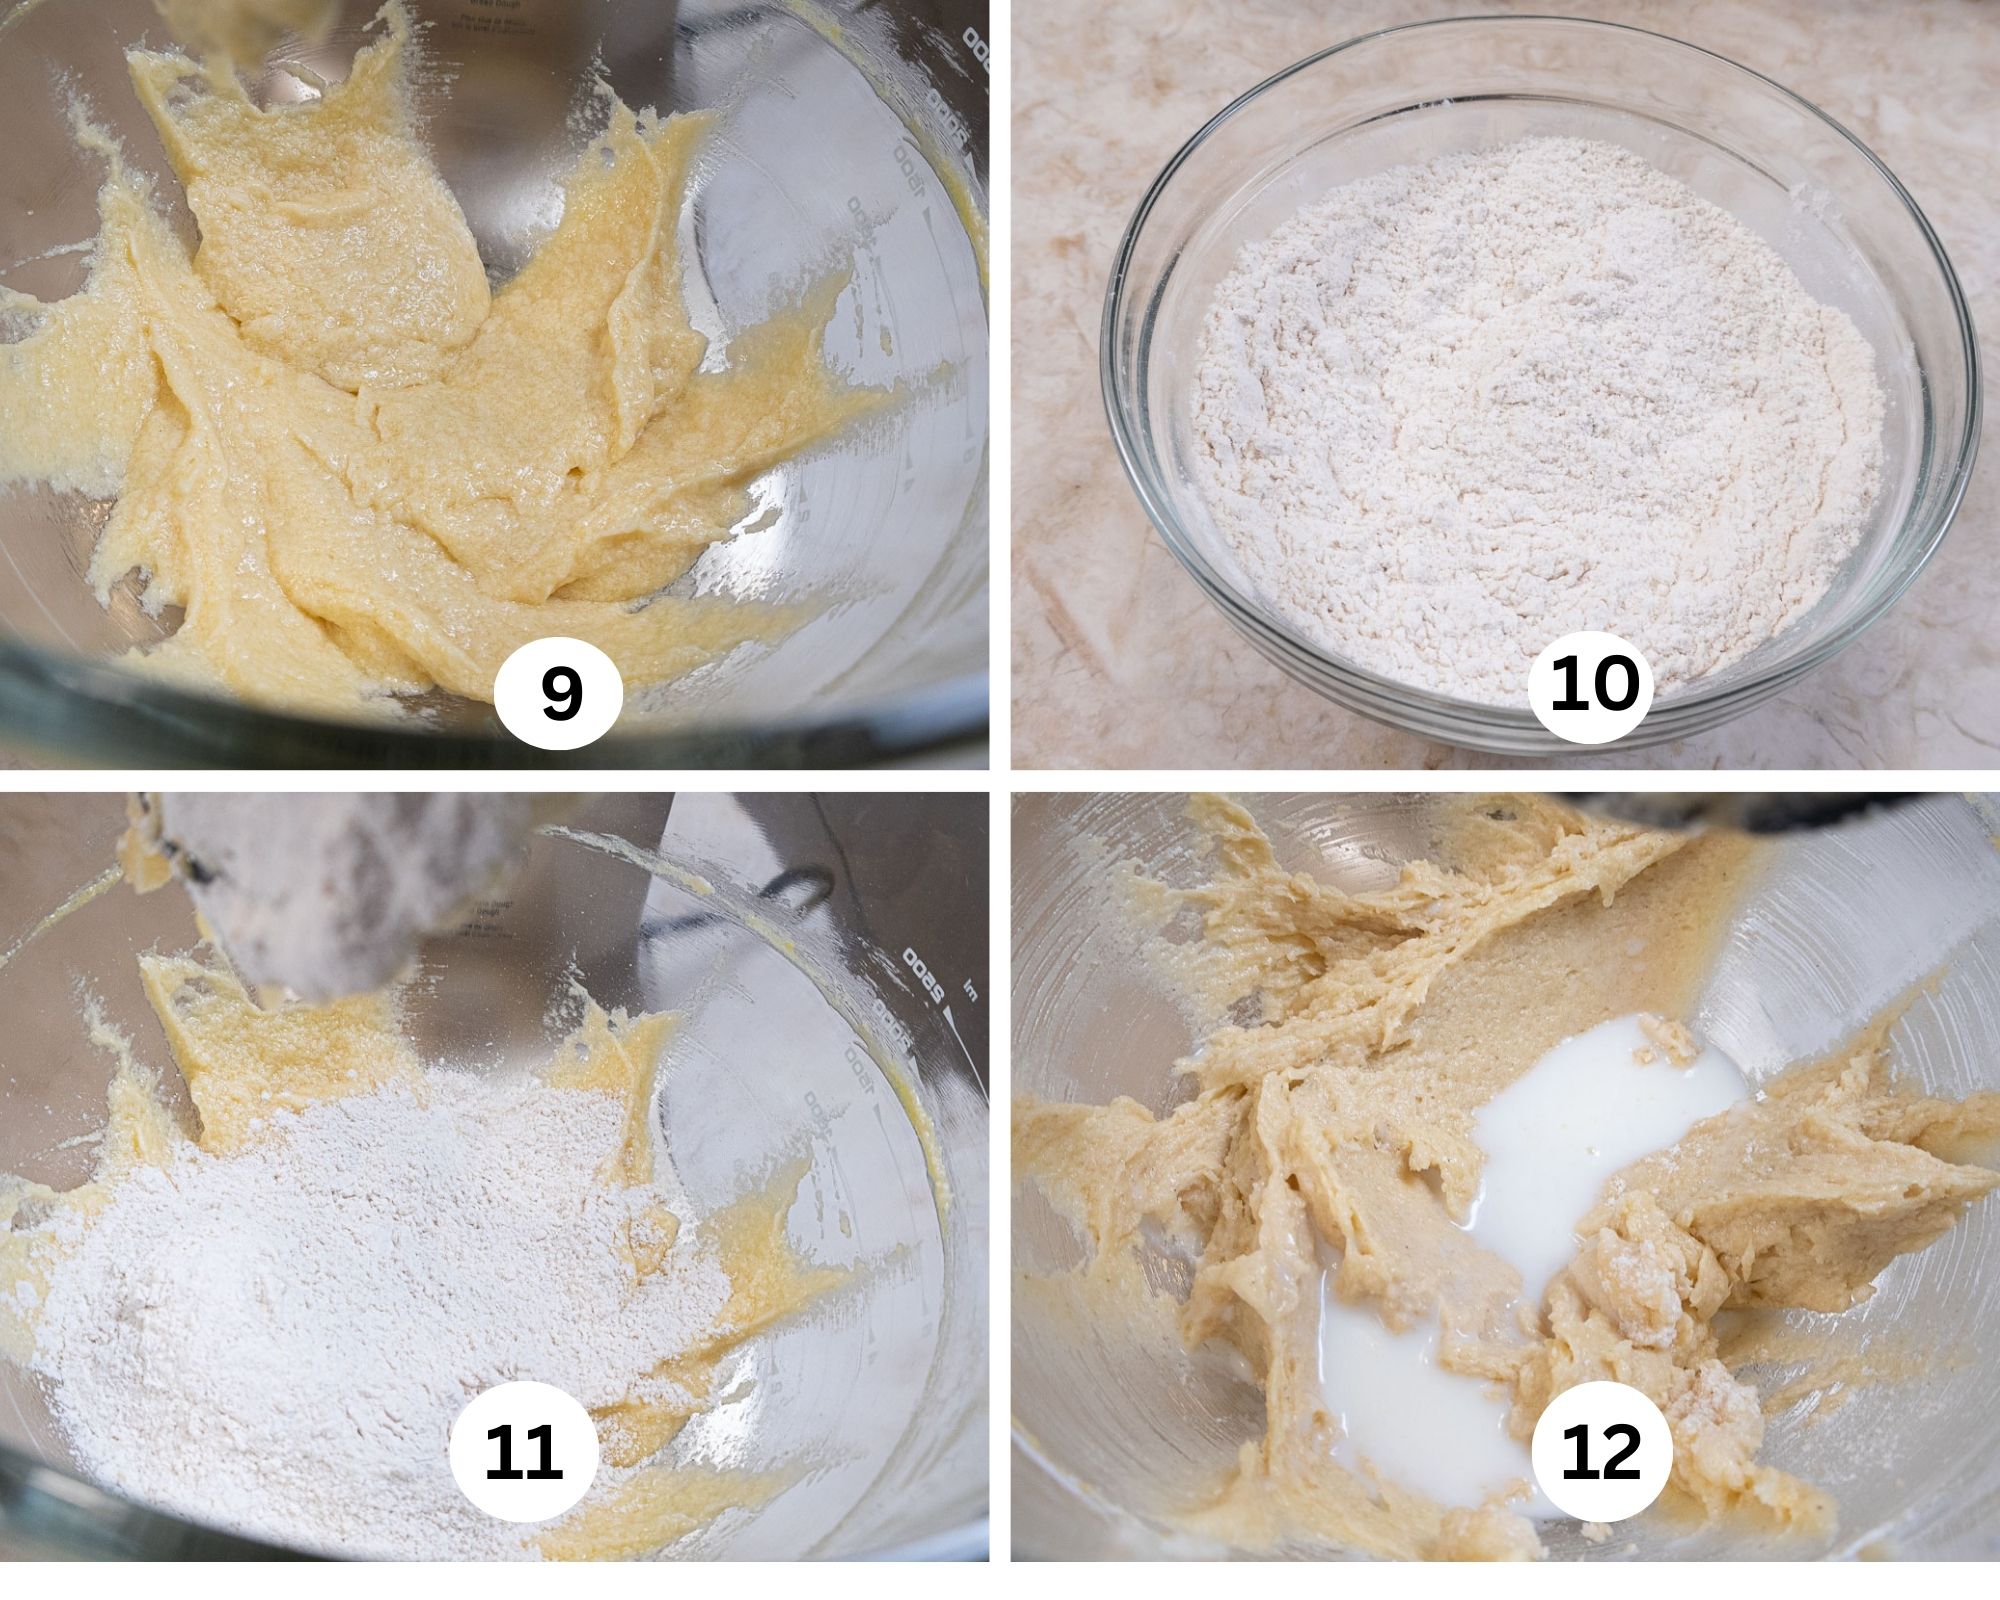 This collages shows the last egg has left the batter curdled, the dry ingredients blended, part of the flour in the mixer, part of the milk added to the batter.